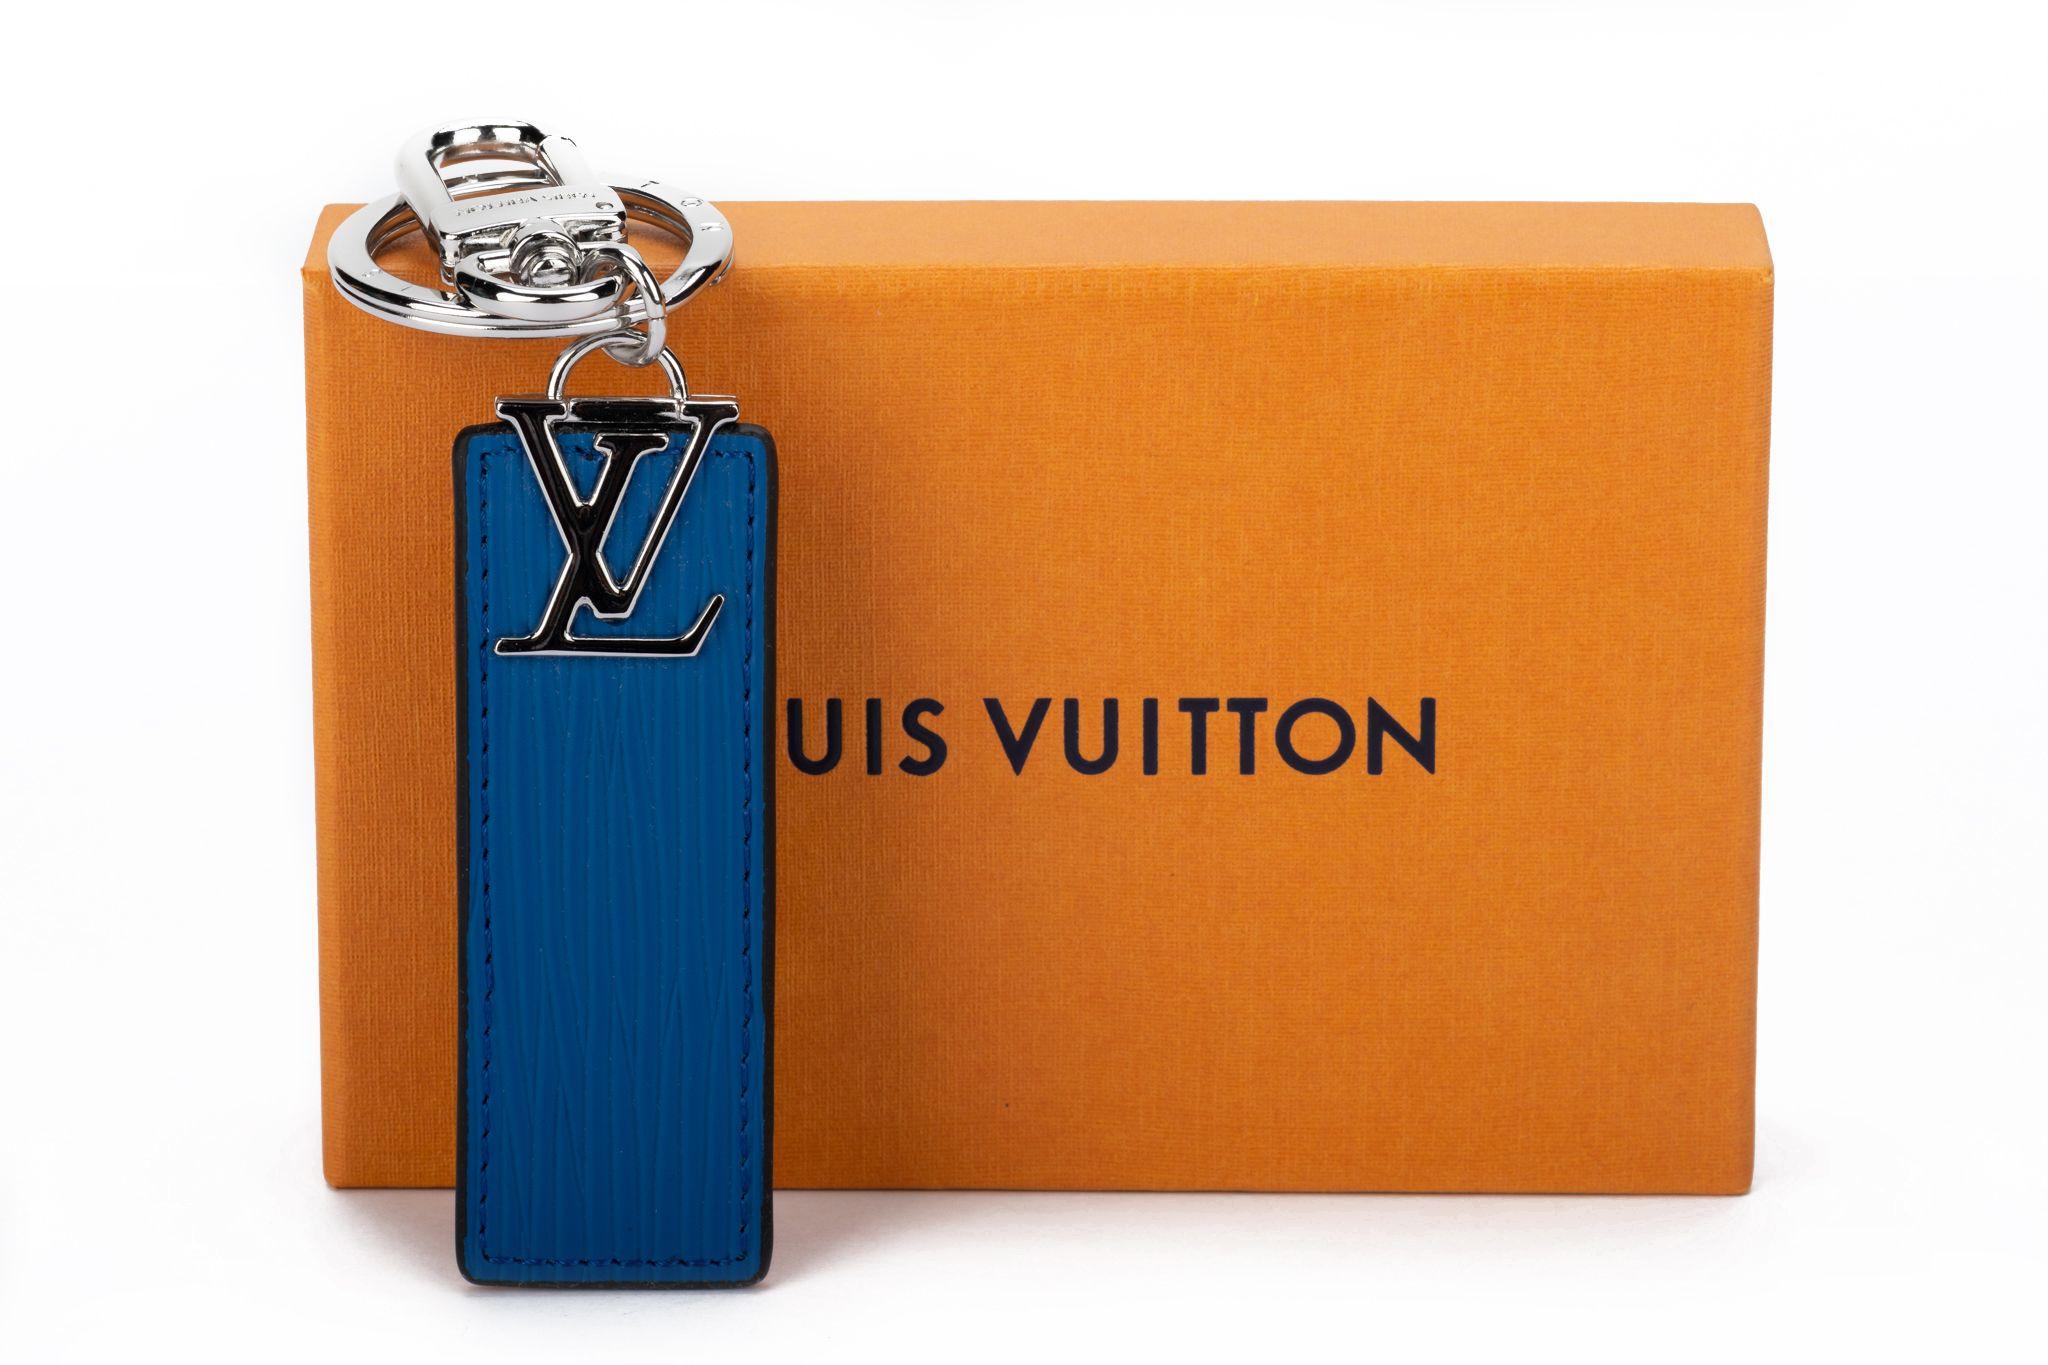 Louis Vuitton reversible blue /black keychain or bag charm with silver tone hardware. Excellent condition with original box and dustcover.